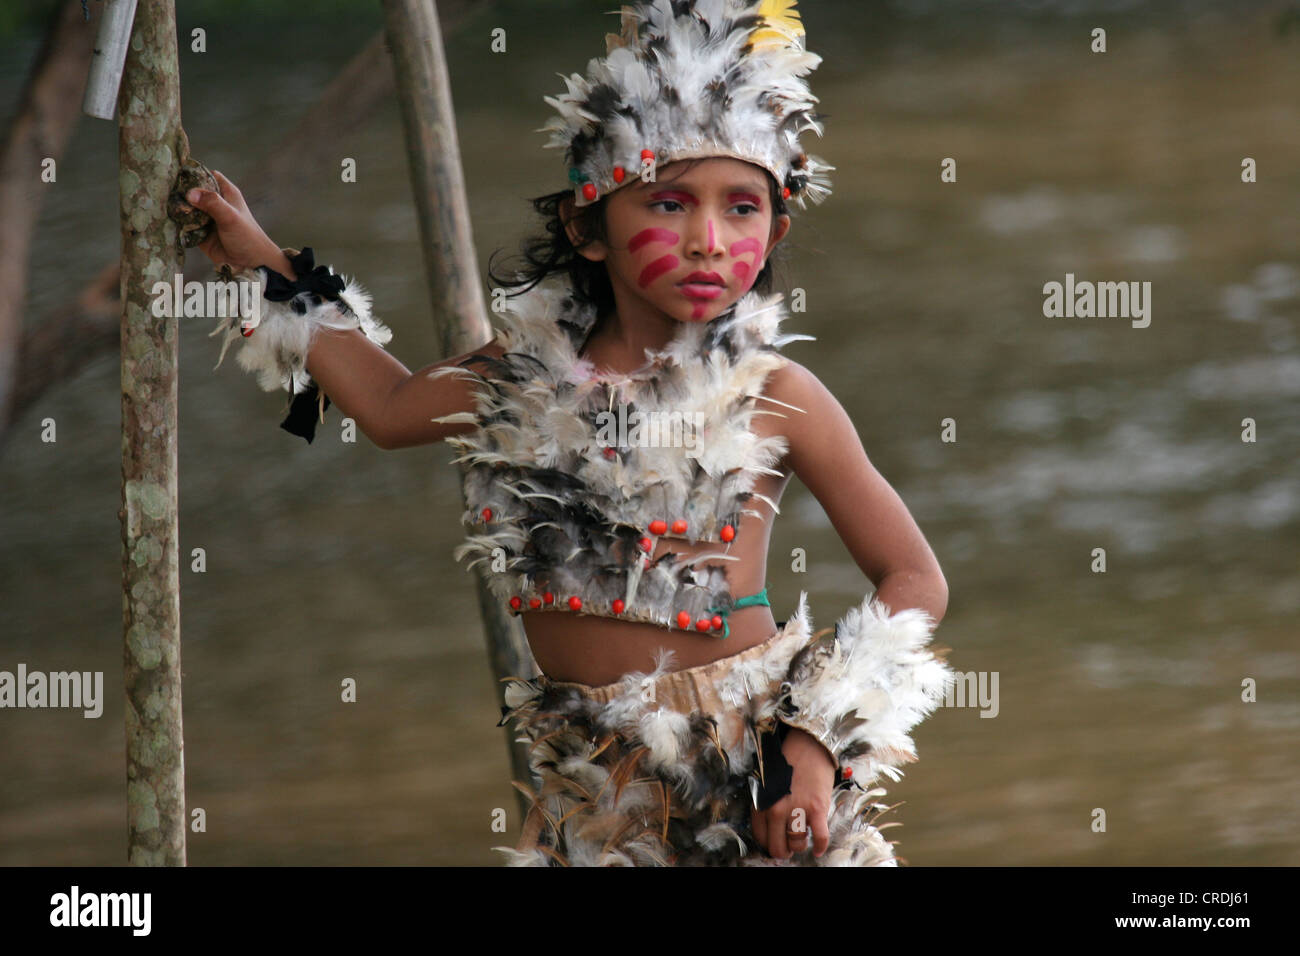 Young girl dressed in traditional Amazonian feathered clothing. Stock Photo